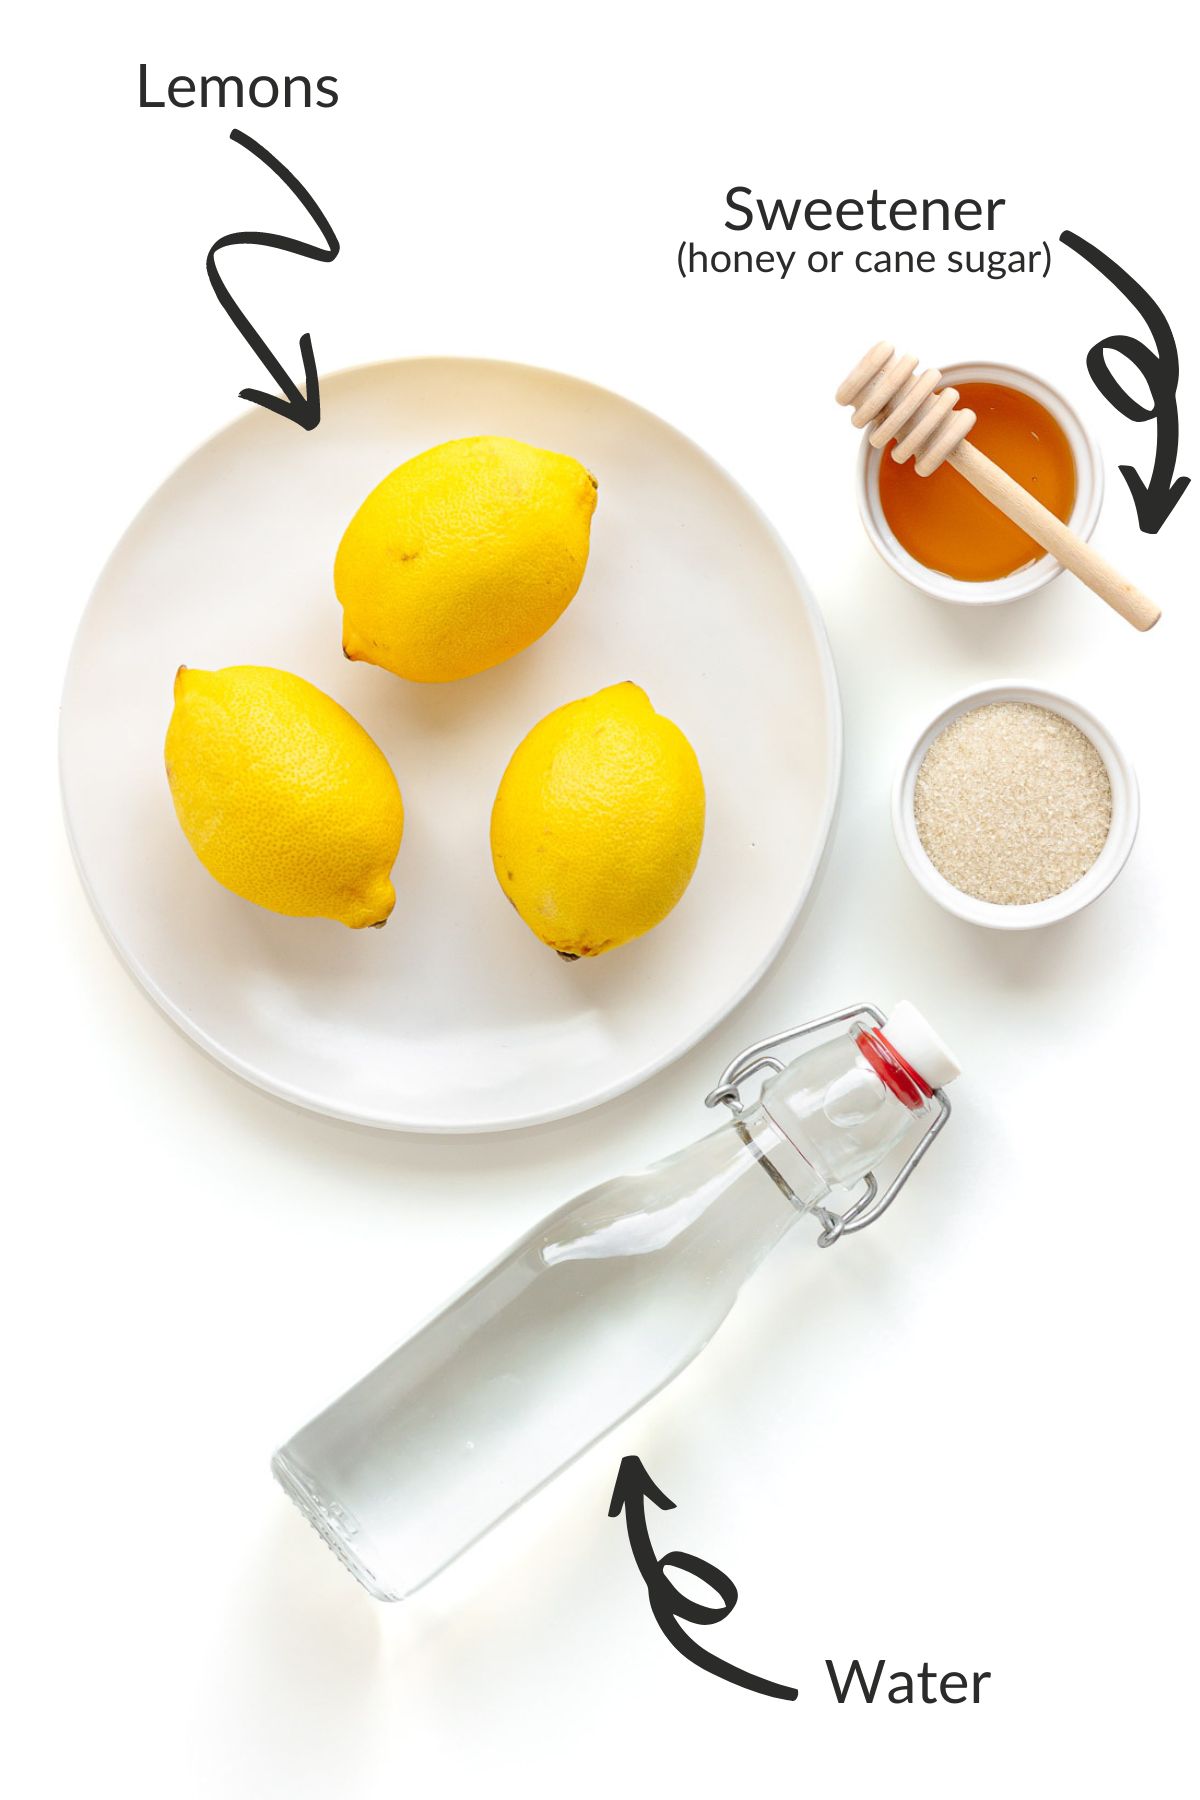 Labelled photo of ingredients needed to make lemonade popsicles.